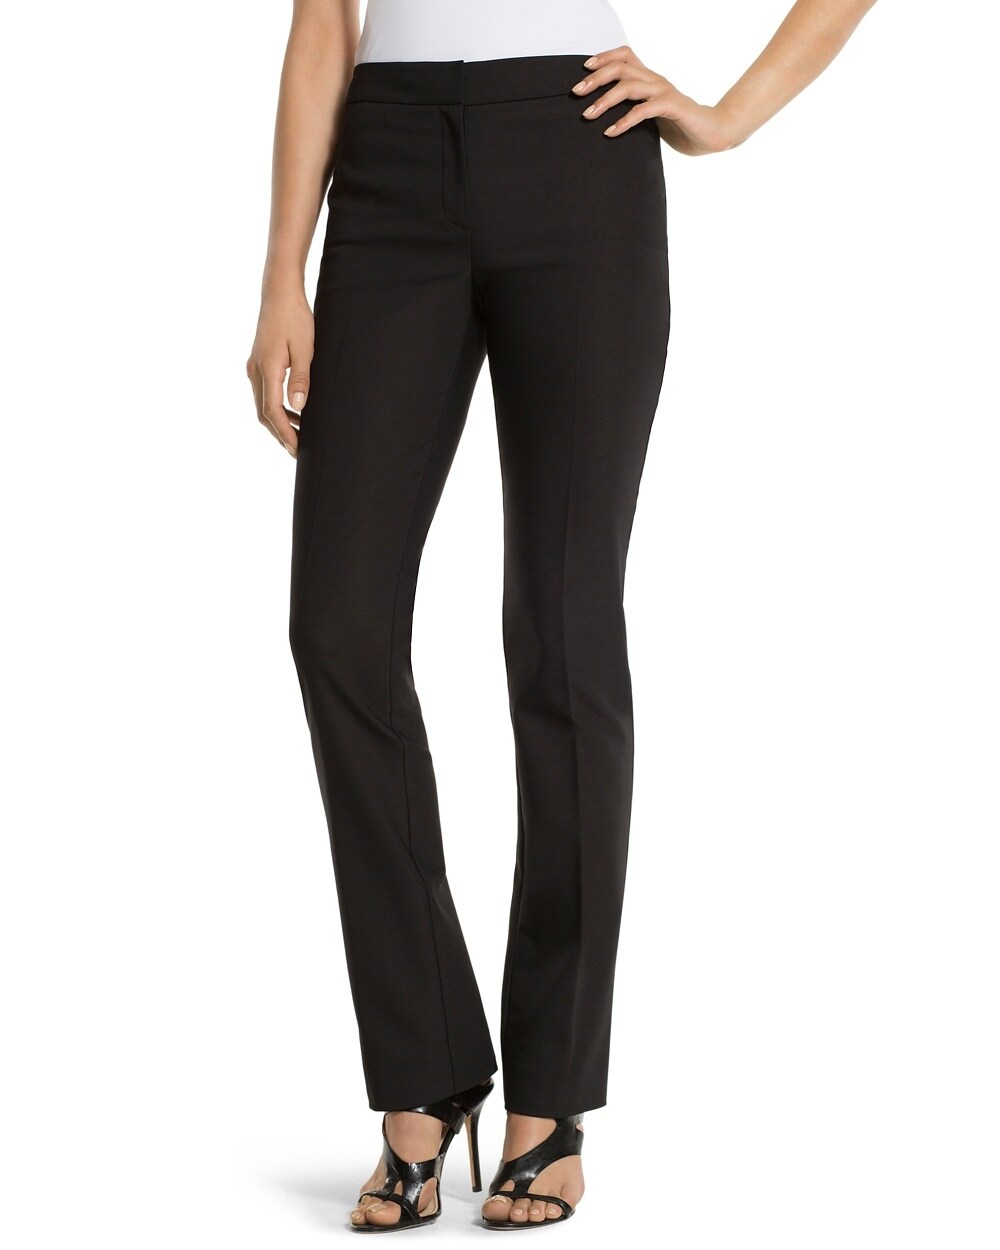 So Slimming Grace Pants - Chico's